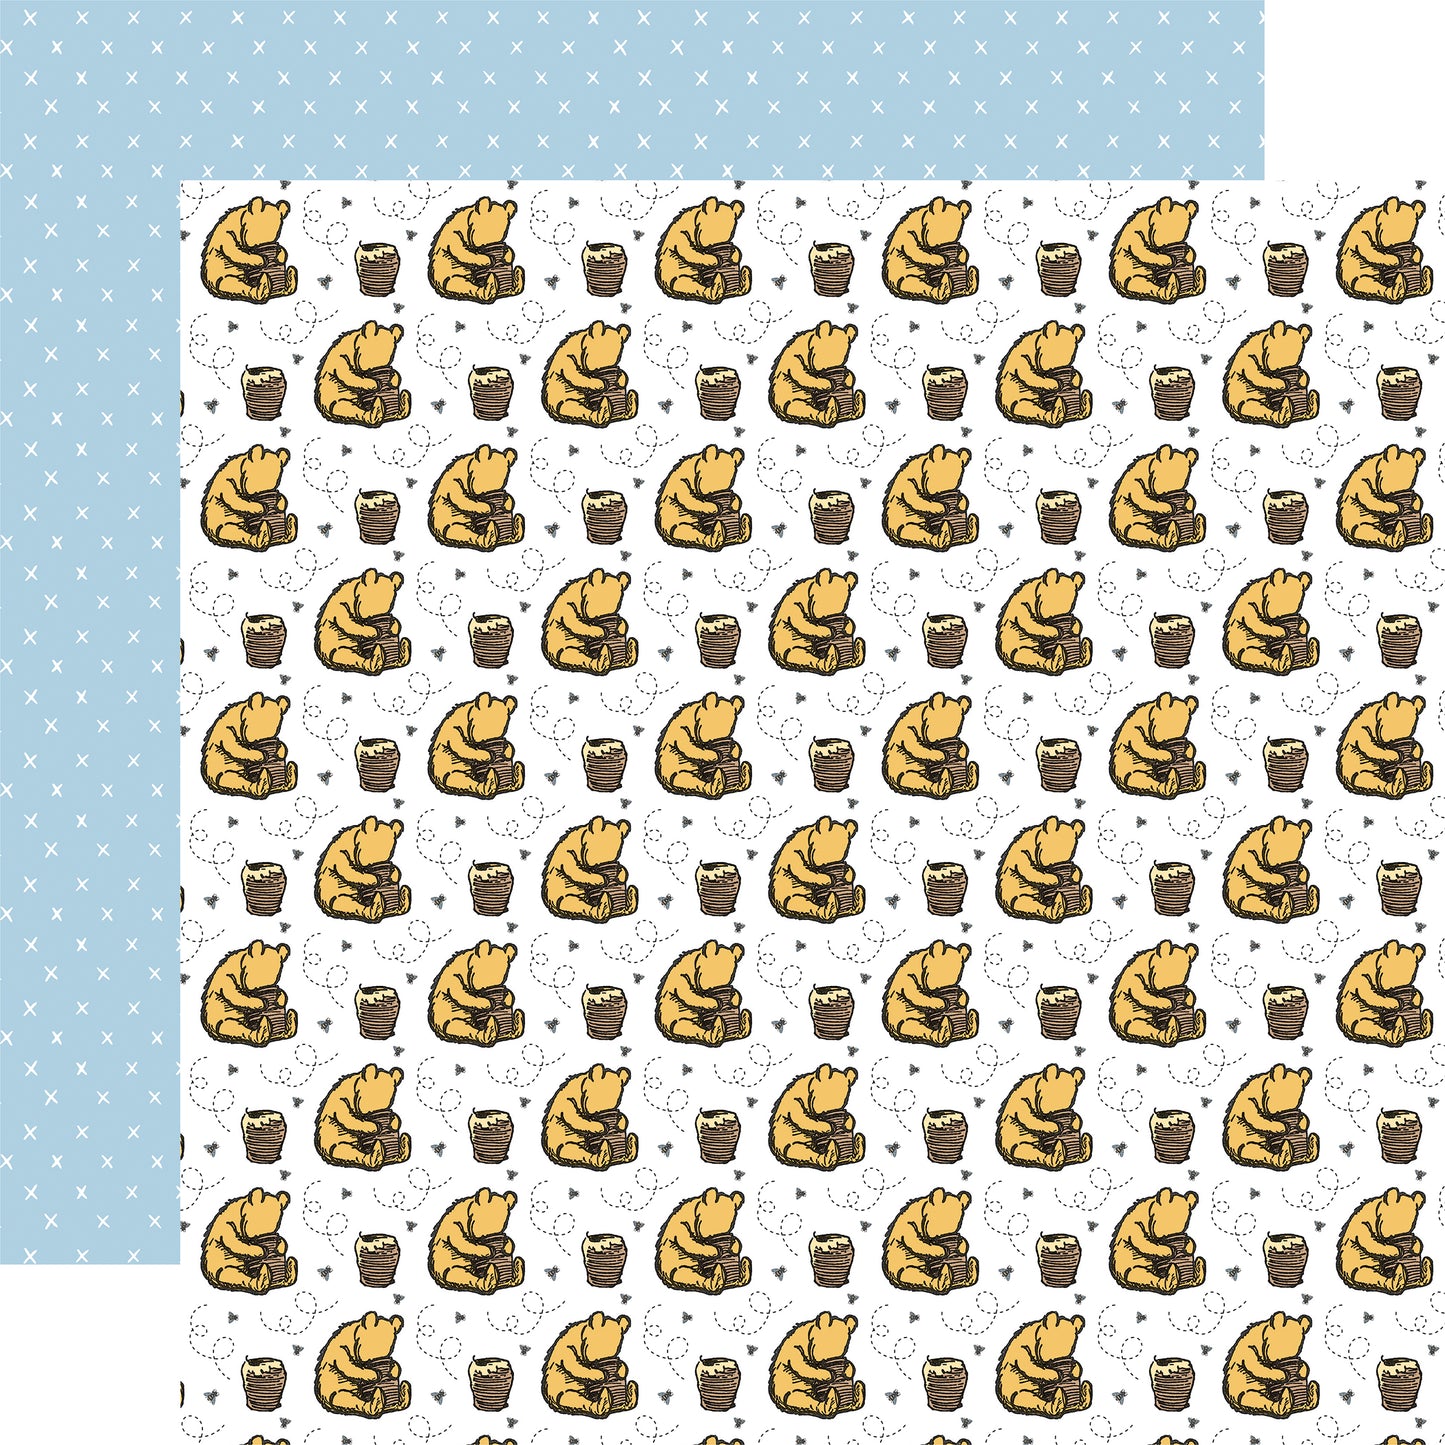 Honey and Pooh Bear - Winnie the Pooh - 12x12 Scrapbook Paper